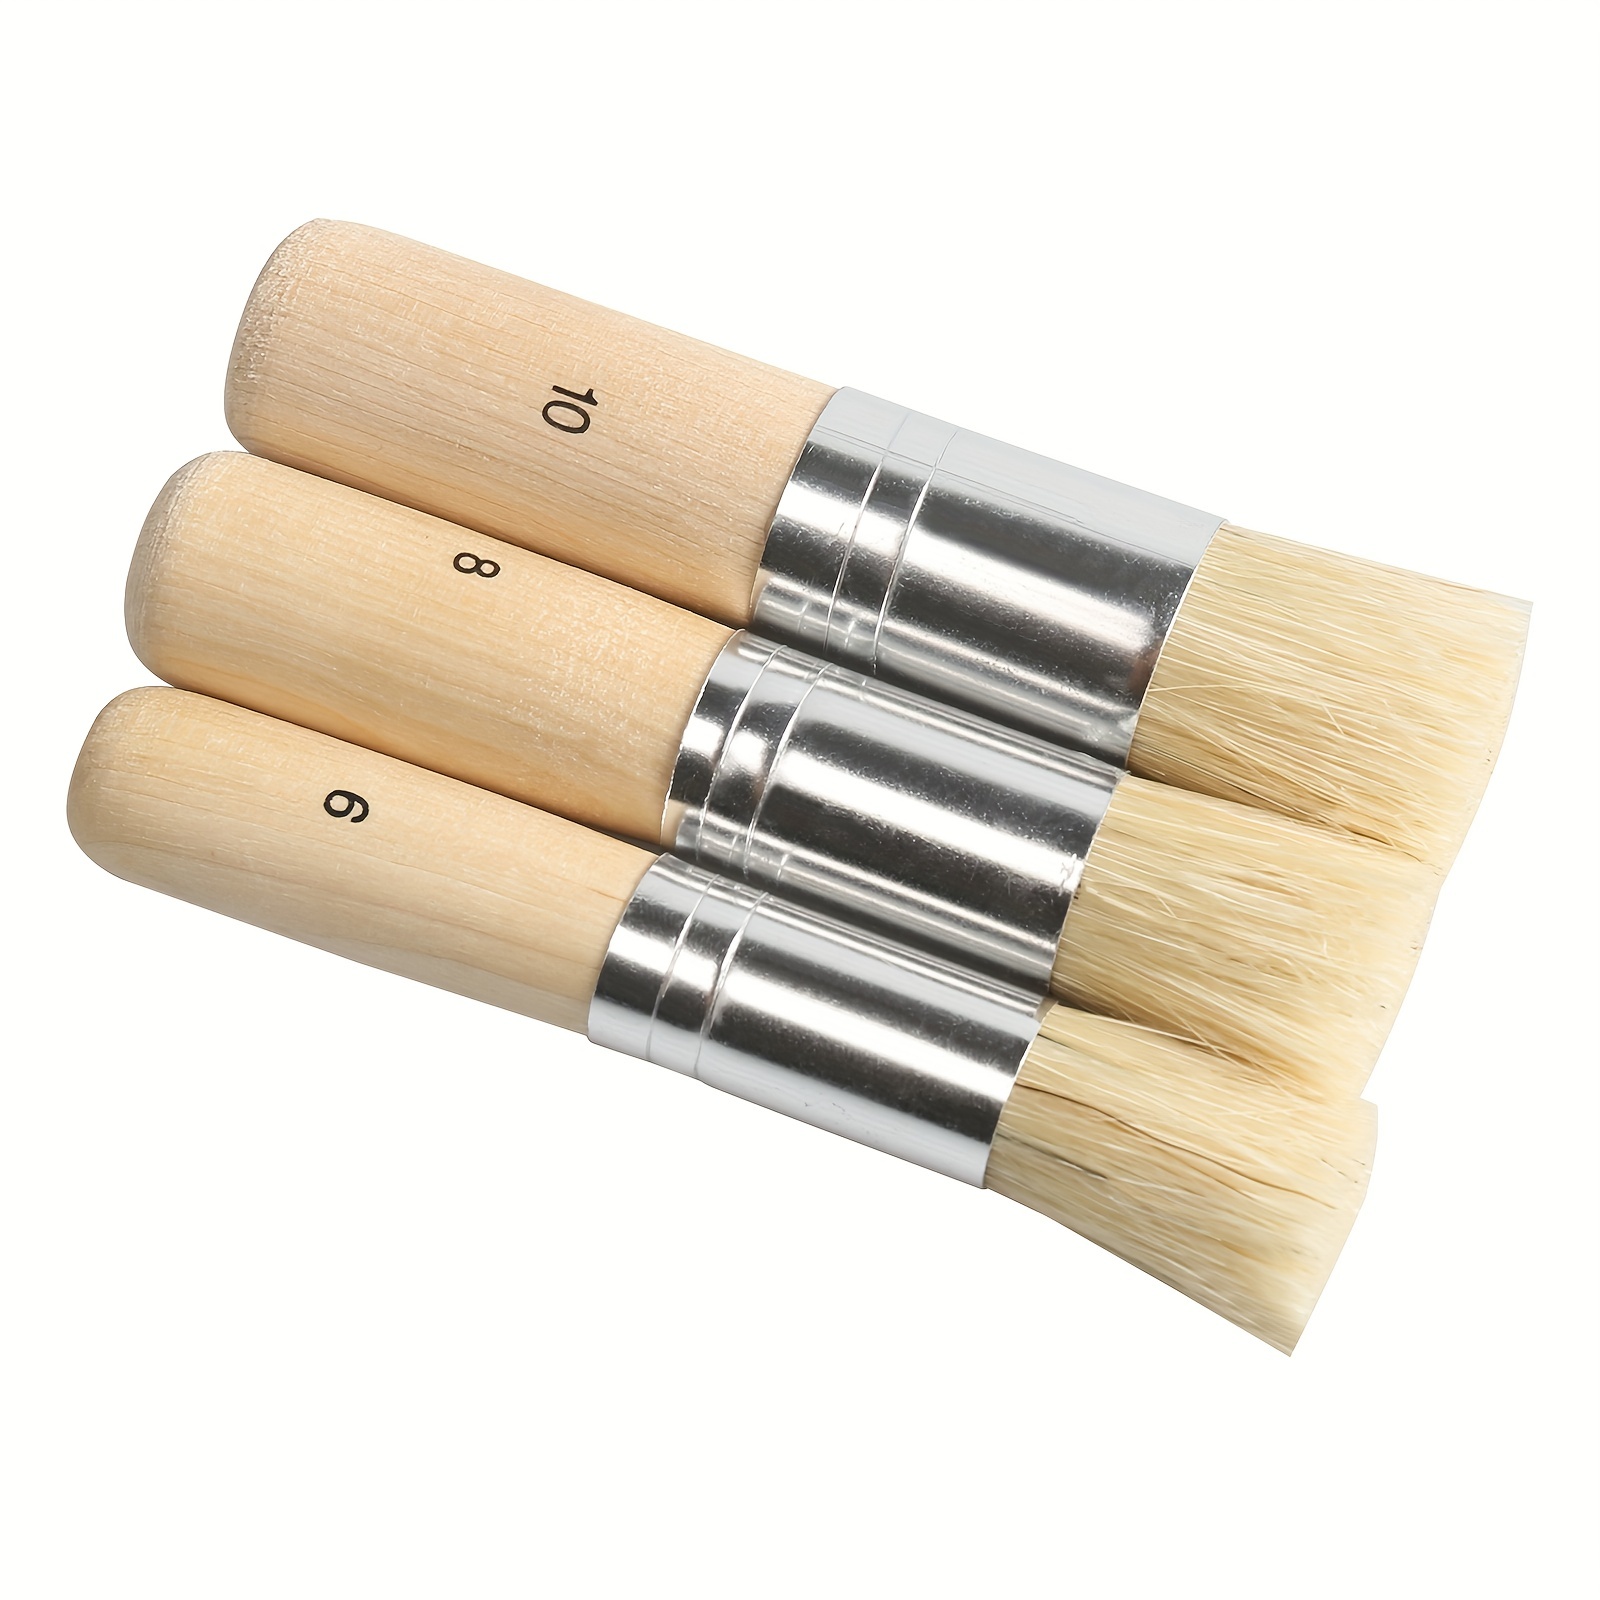 Auhoahsil Stencil Brushes Set, 5 Pcs Natural Bristle Wooden Handle Template  Brushes for Wood Wall Model House Painting, Stencil Projects, Card